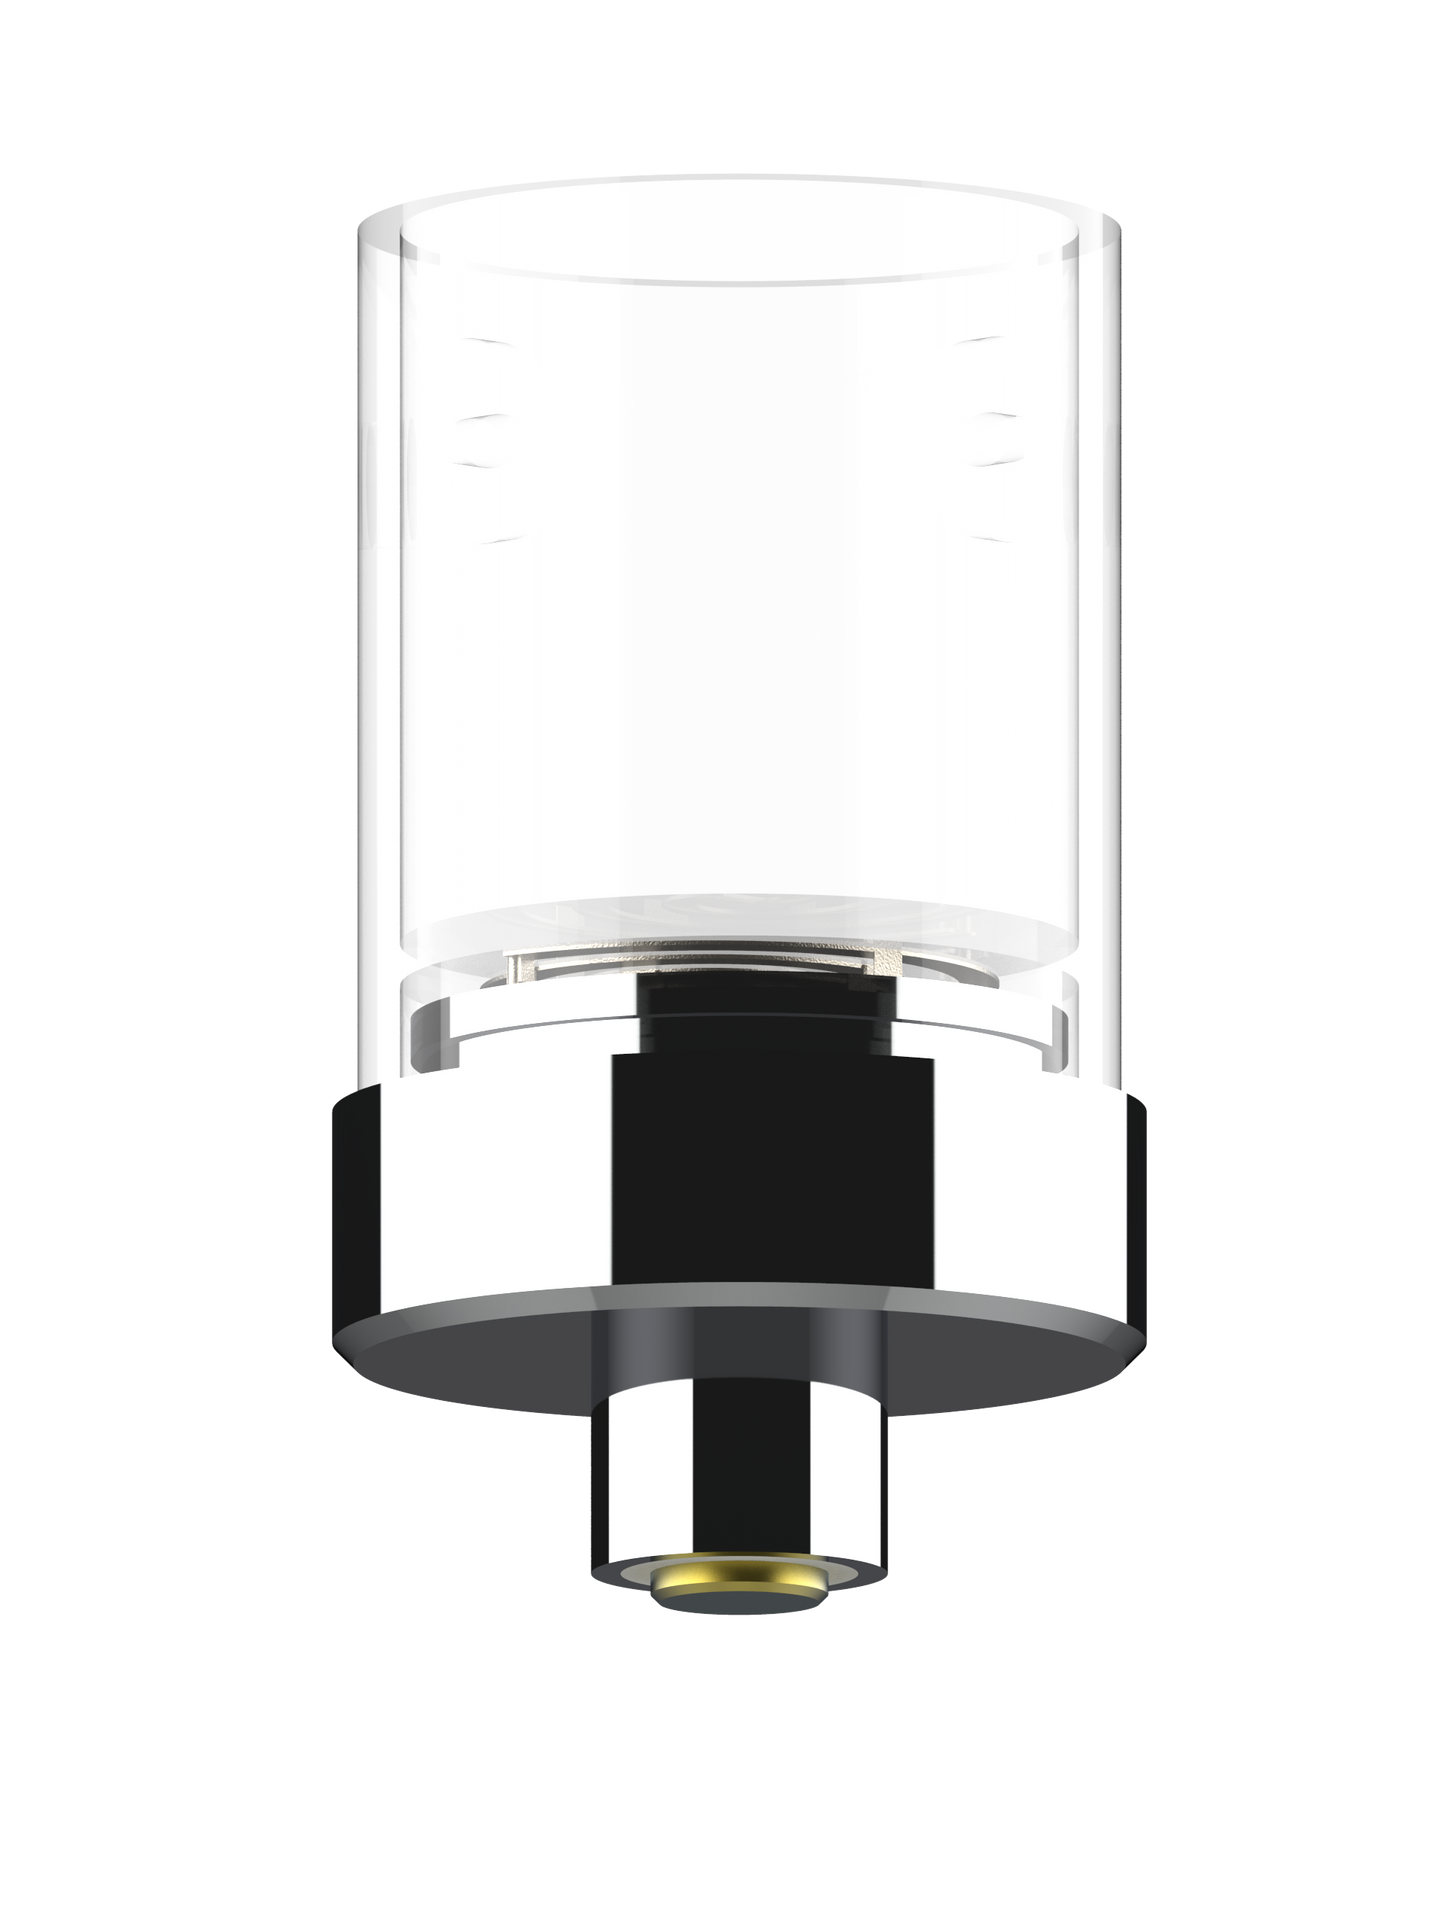 Rover Dab Pen Replacement Thruster Cap Mouthpiece